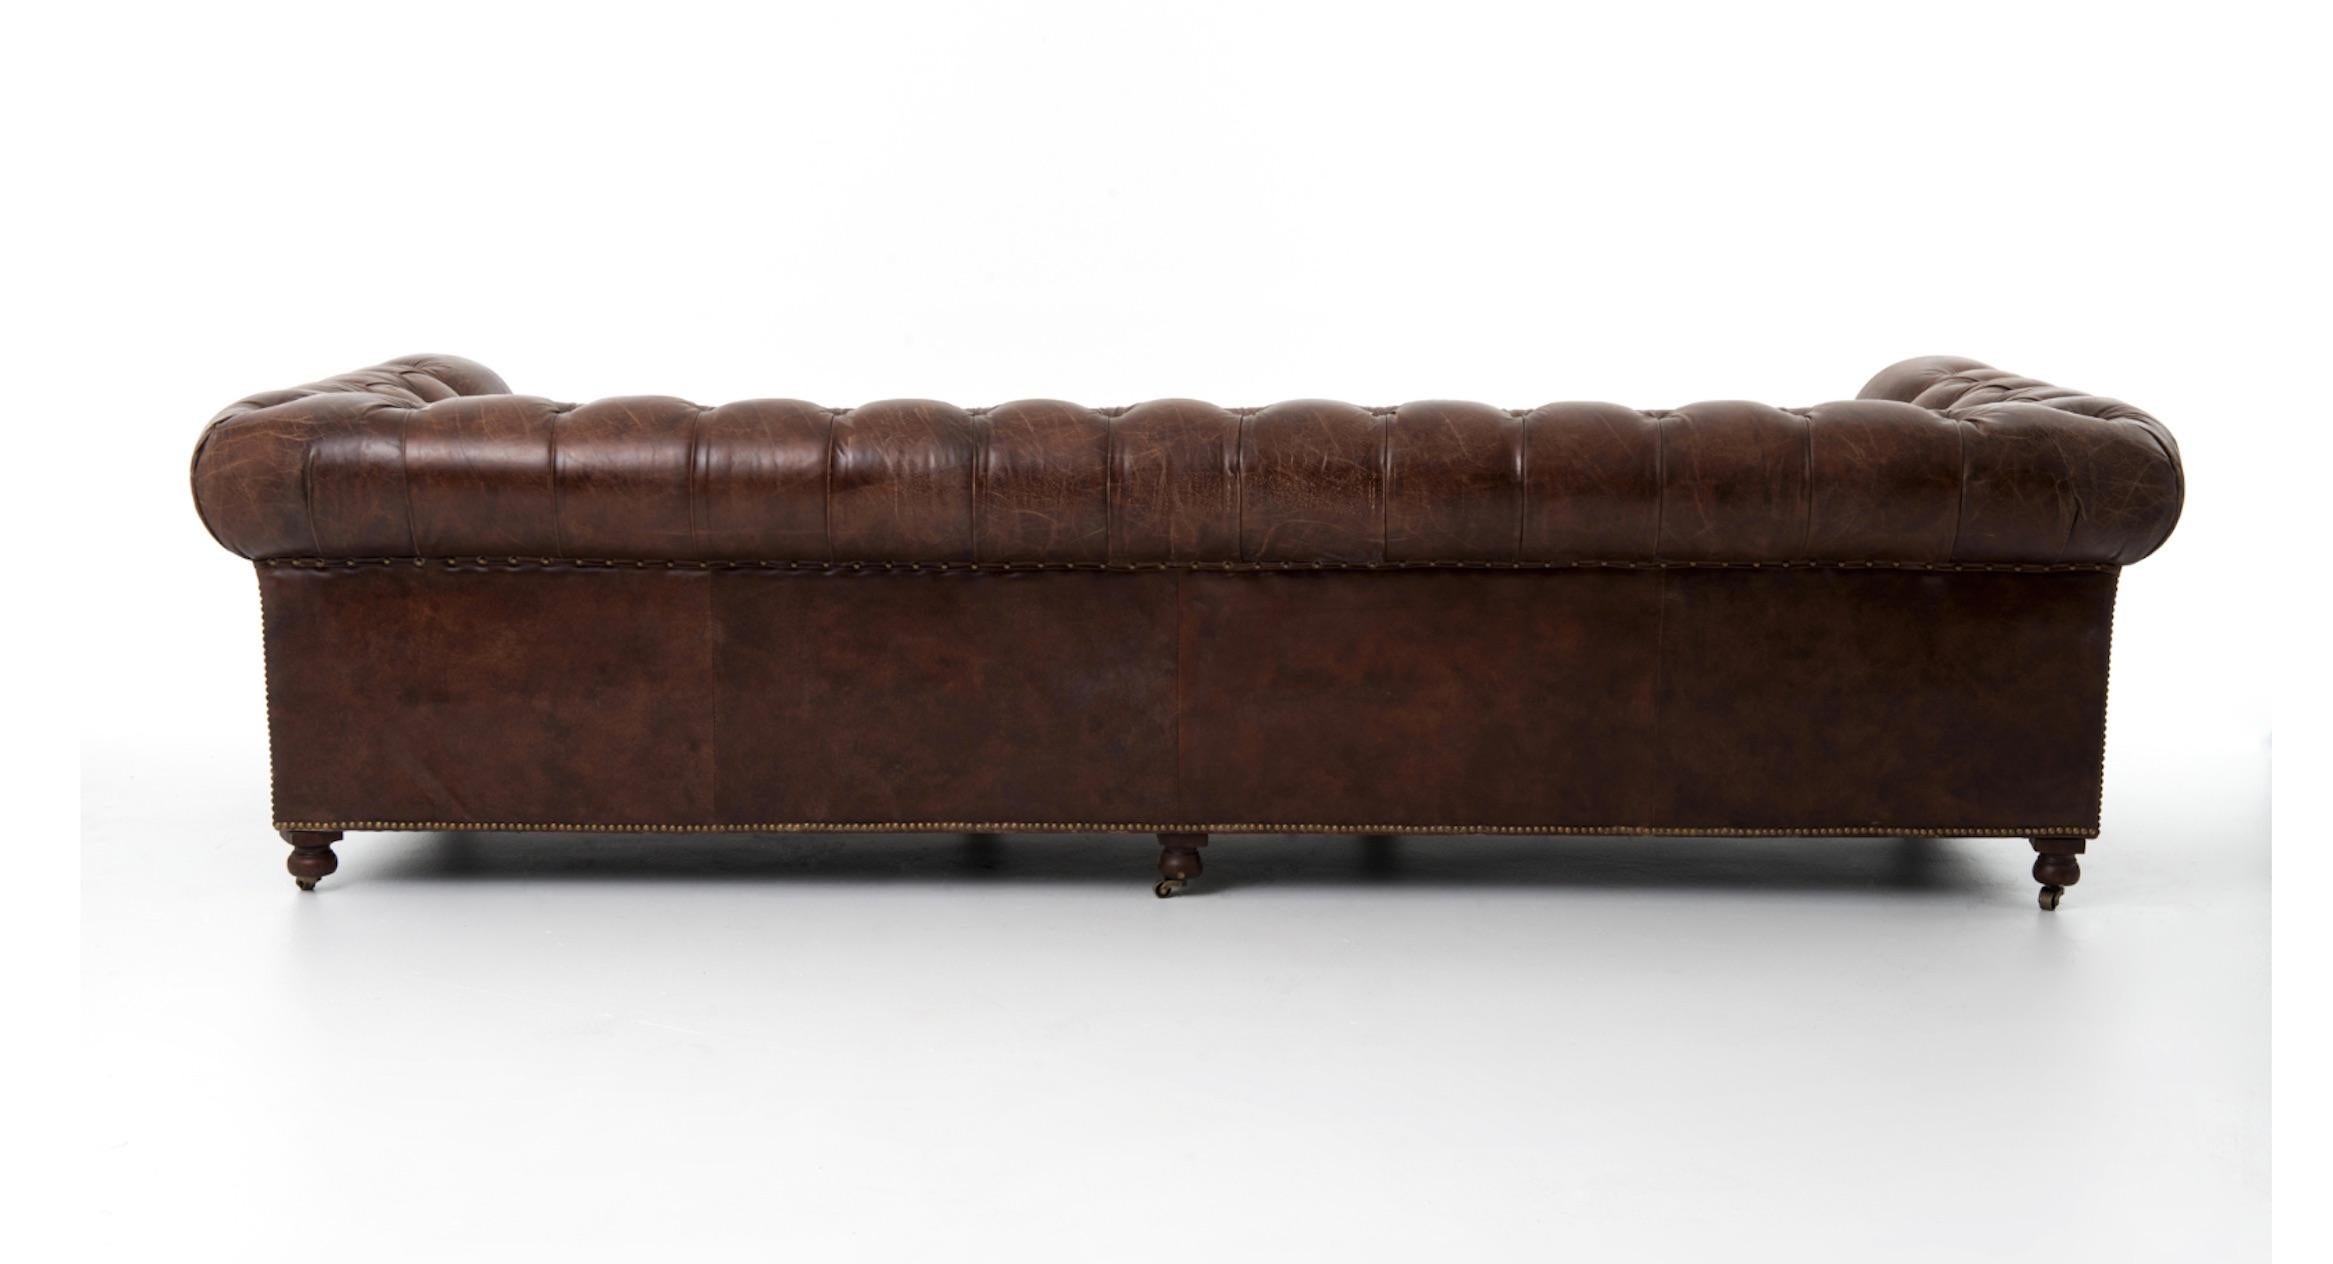 One Pair of Two-Seat Chesterfield Sofa's, Great Scale for Comfort, Great Patina For Sale 4